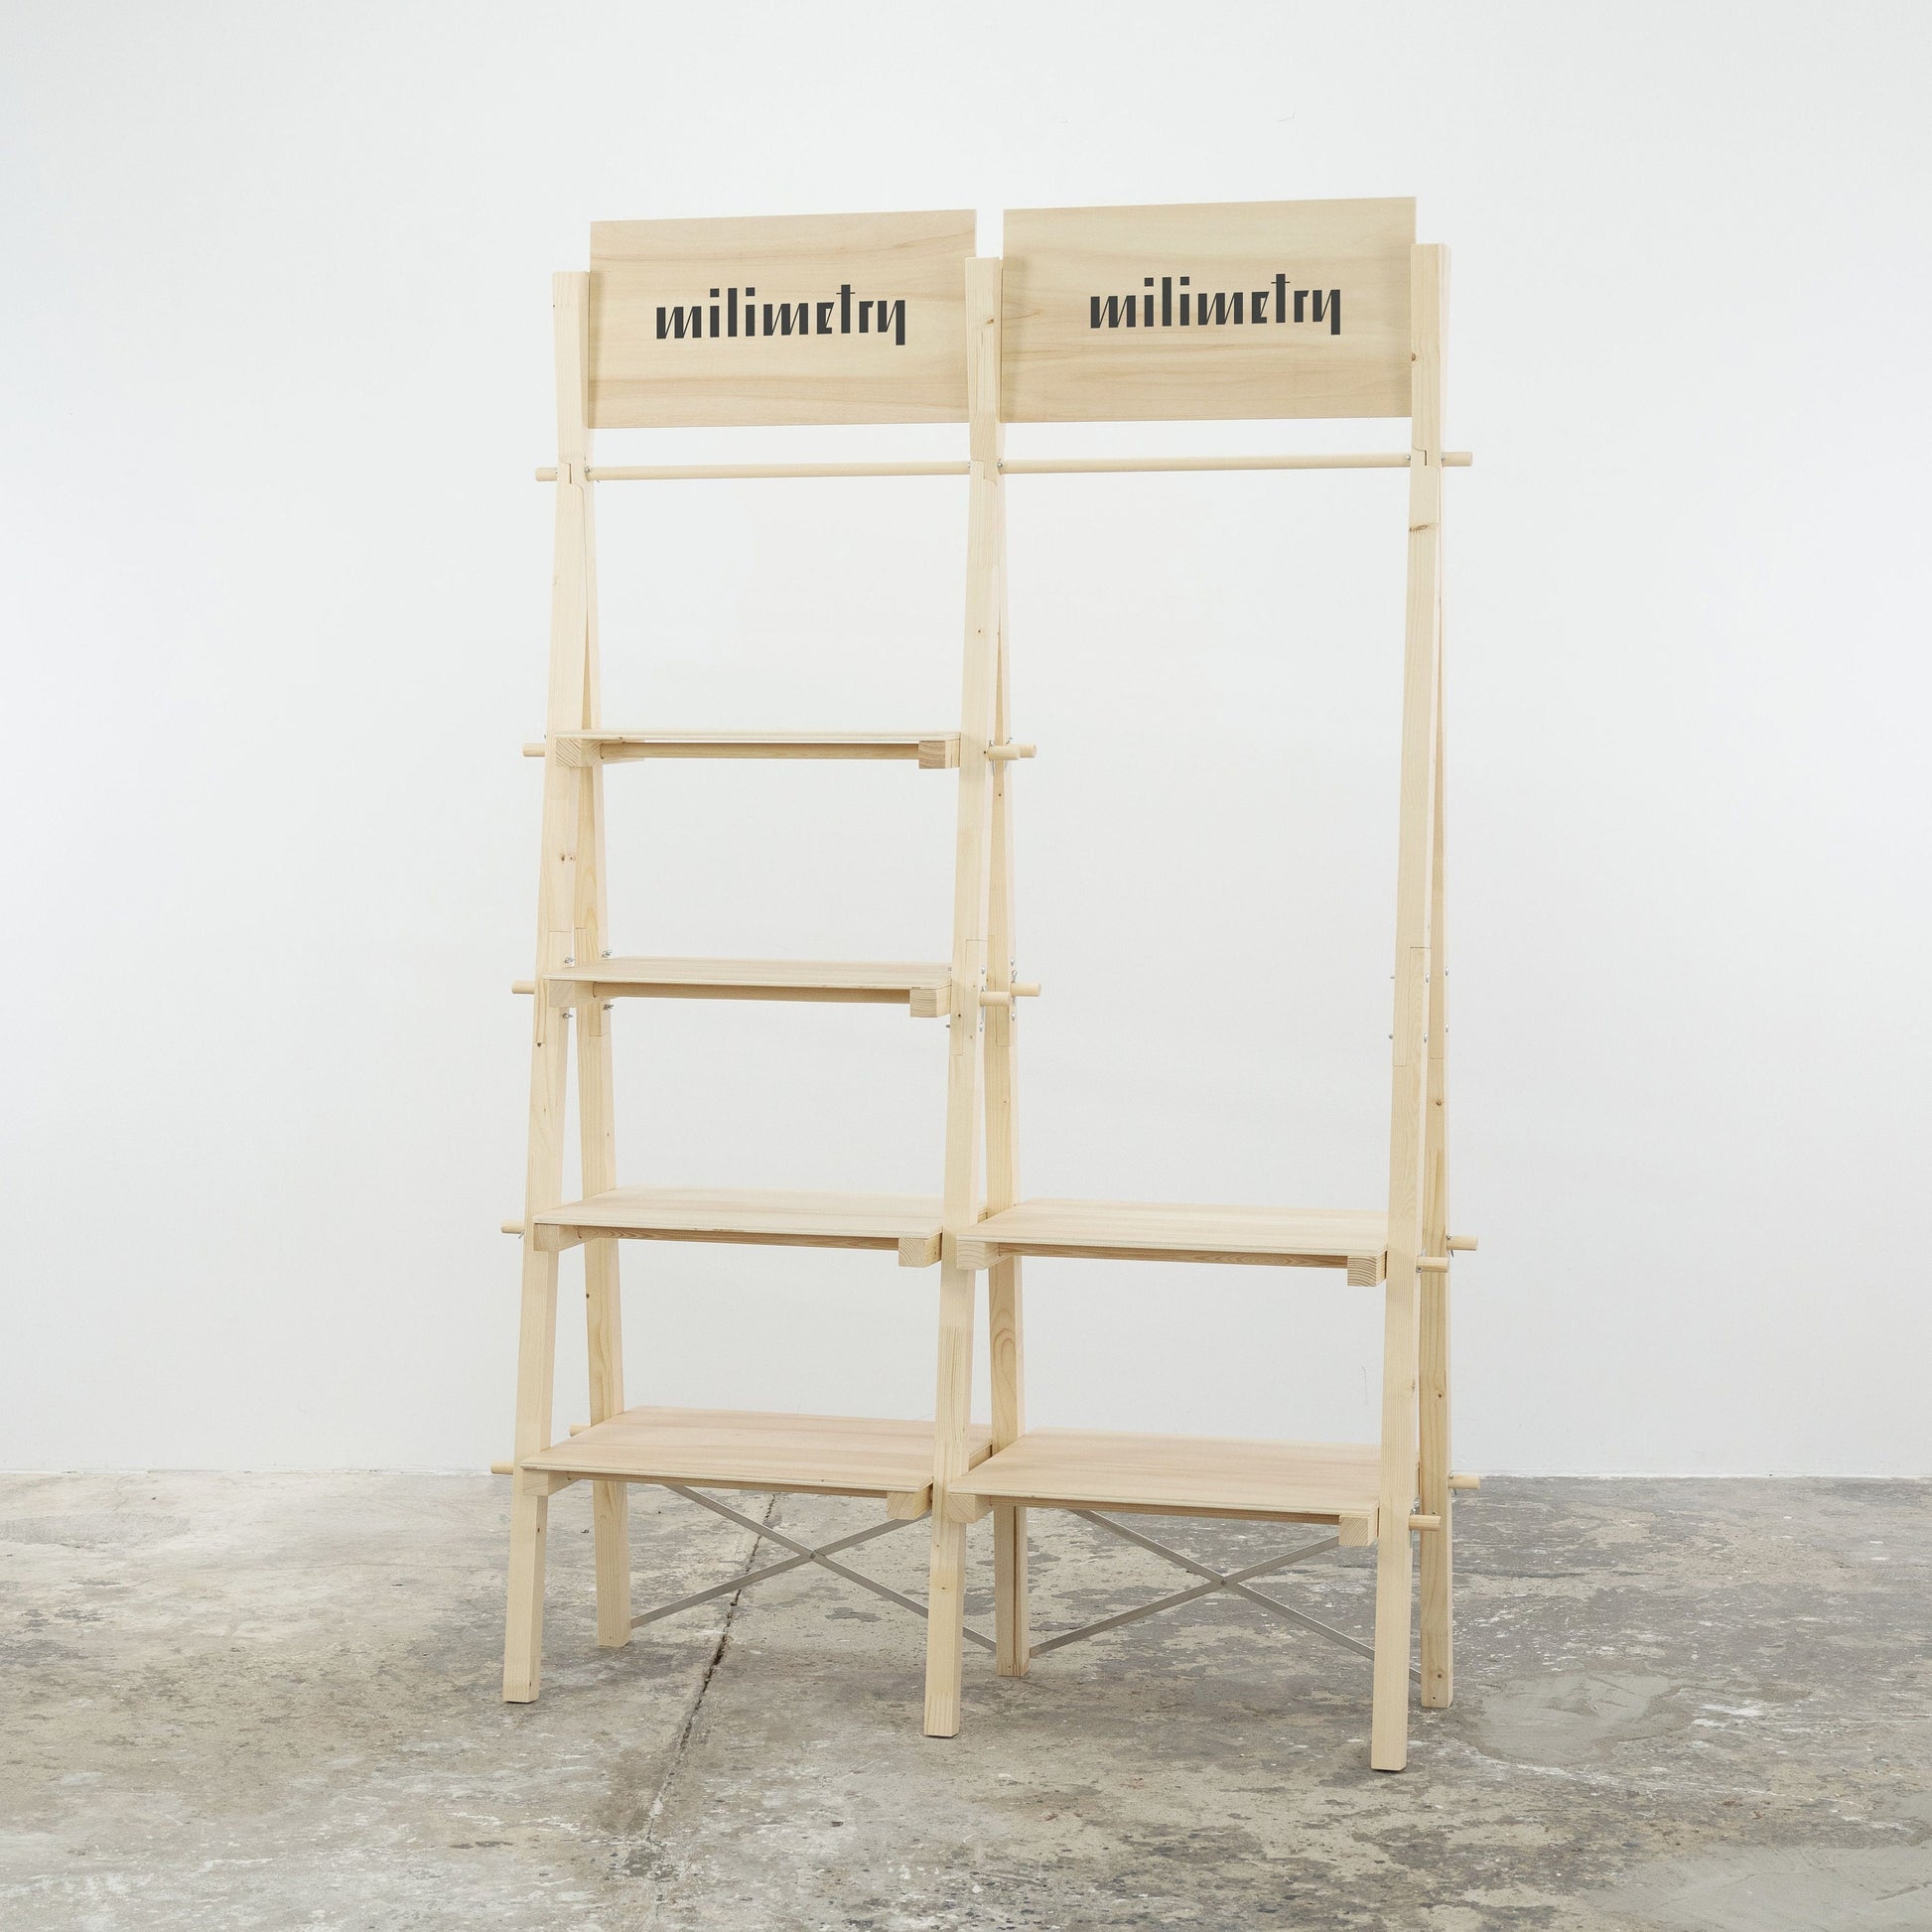 Display shelving unit VRS-01 with clothing rail | Milimetry | collapsible display stand